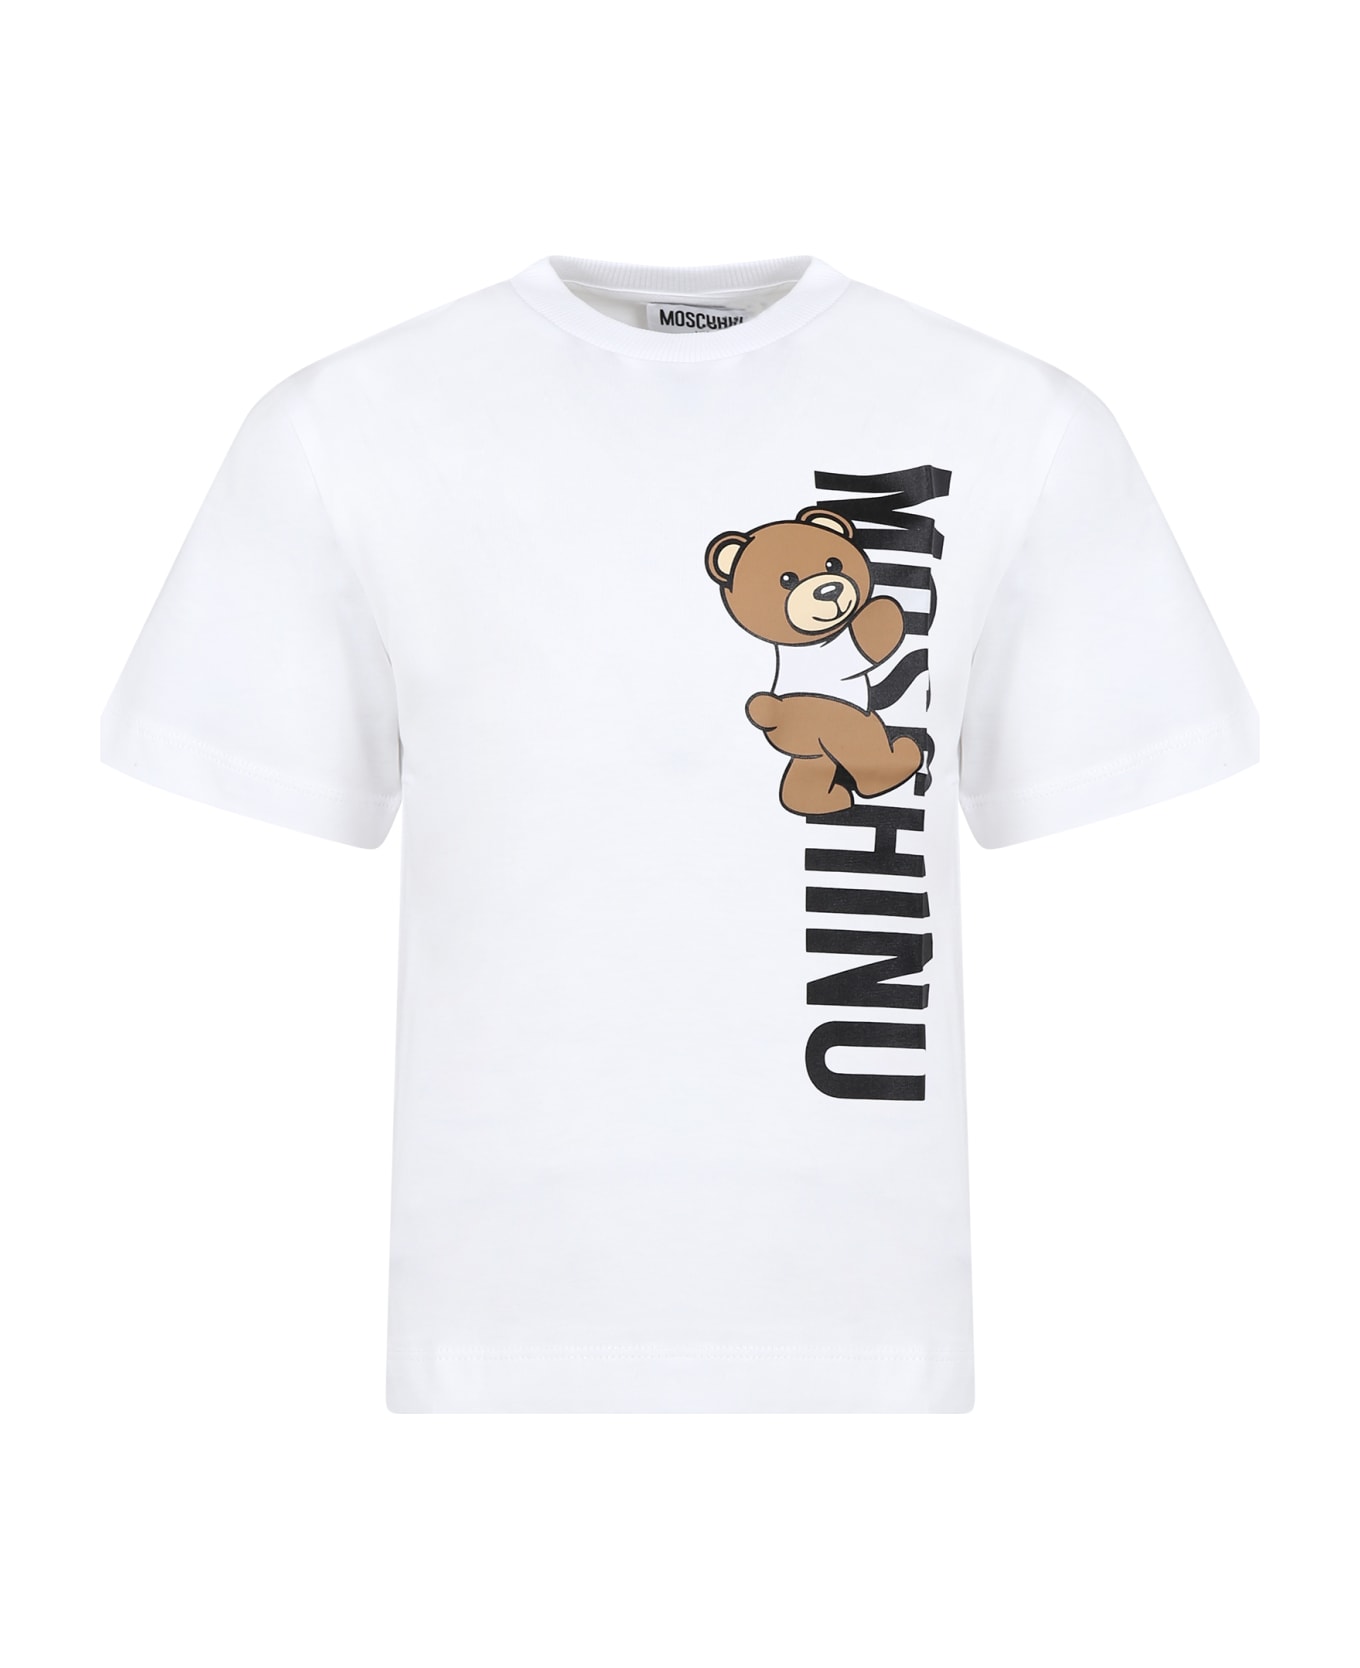 Moschino White T-shirt For Kids With Teddy Bear And Logo - Bianco Ottico